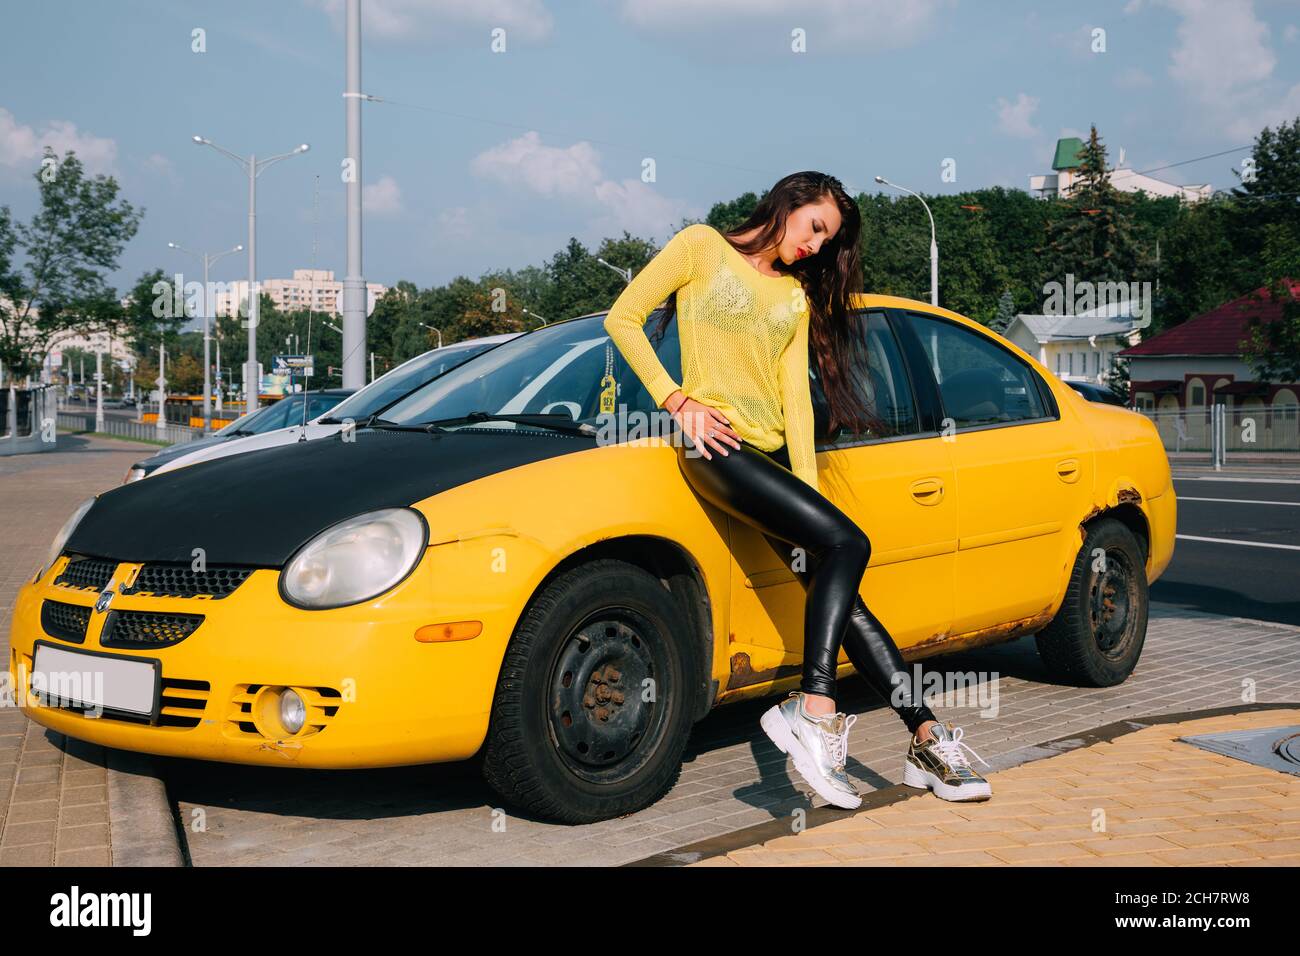 Pretty girl with long dark hair is wearing a bright yellow sweater, shiny, tight dark leggings and golden sneakers; she leans against a yellow car Stock Photo